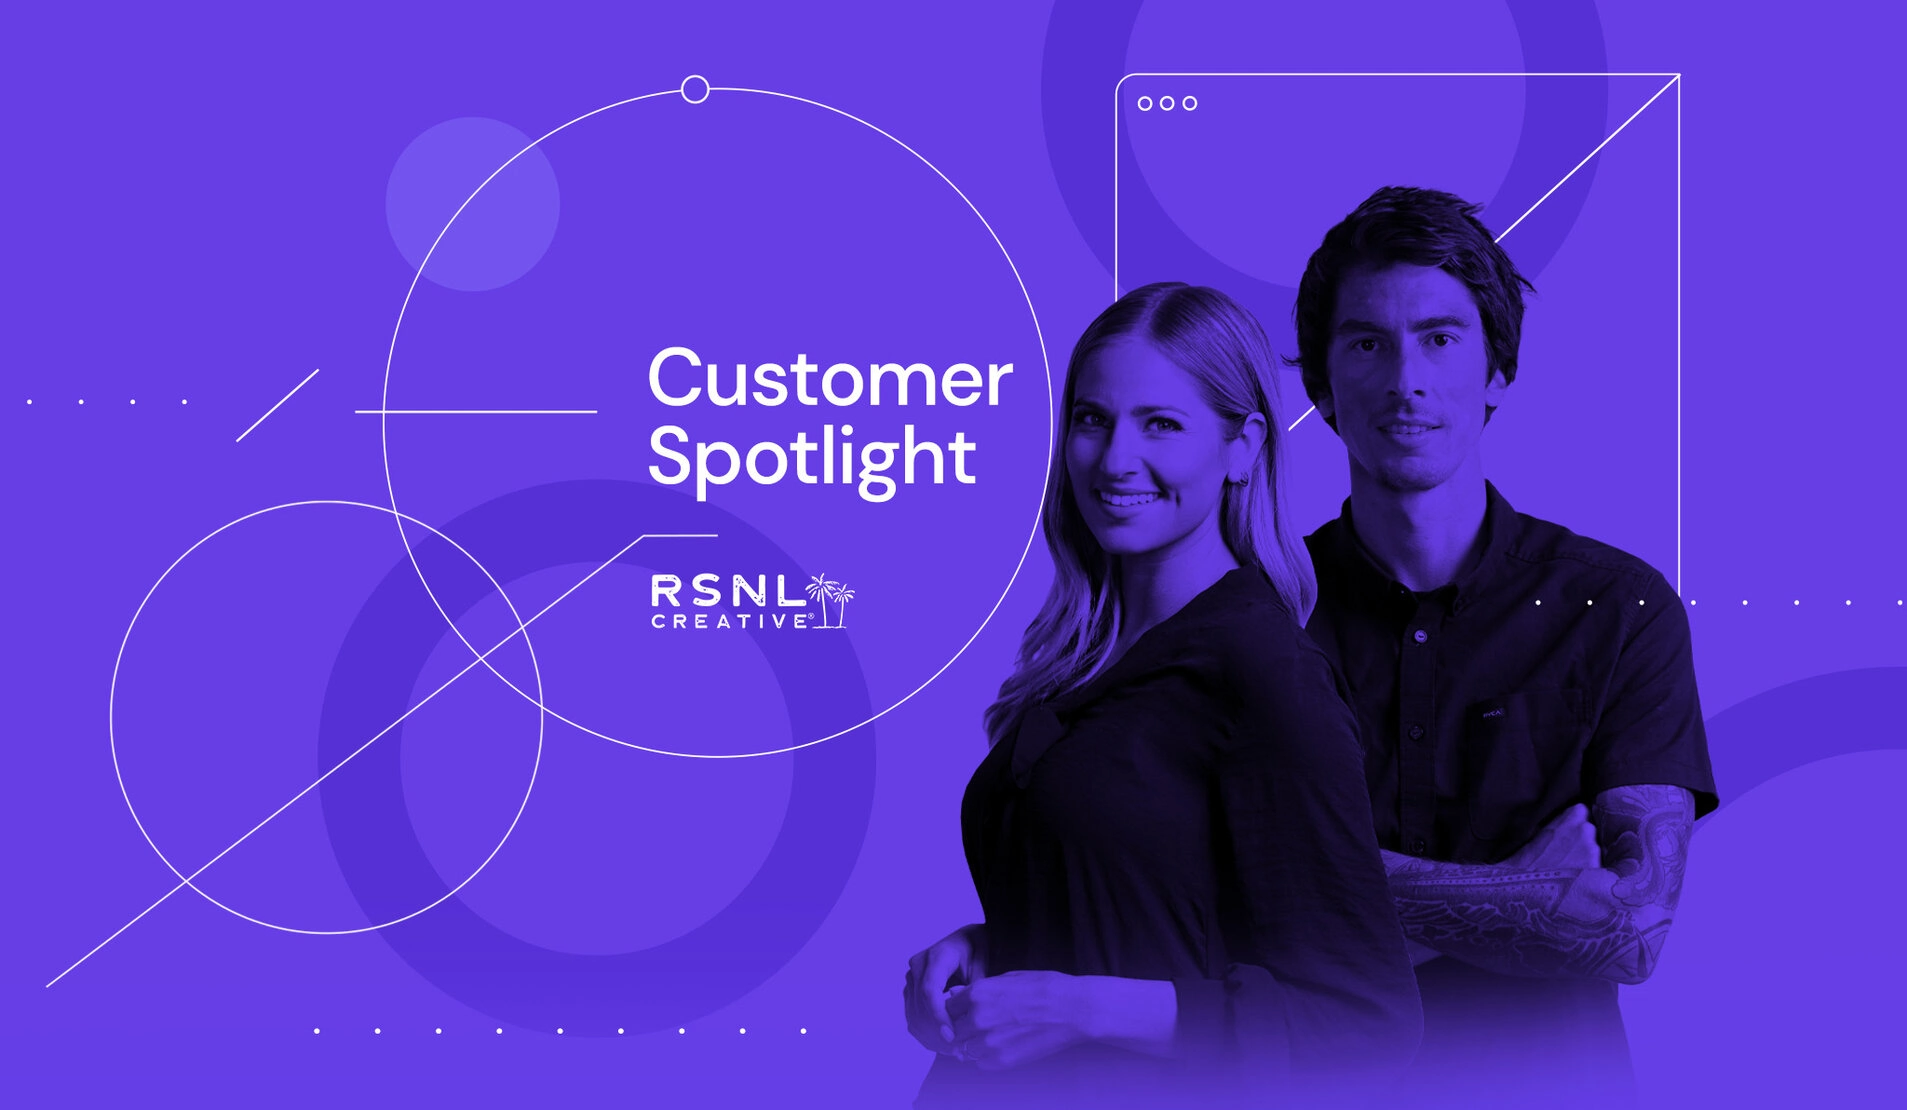 Design Doctors: The RSNL Creative Approach to Brand Building Online  